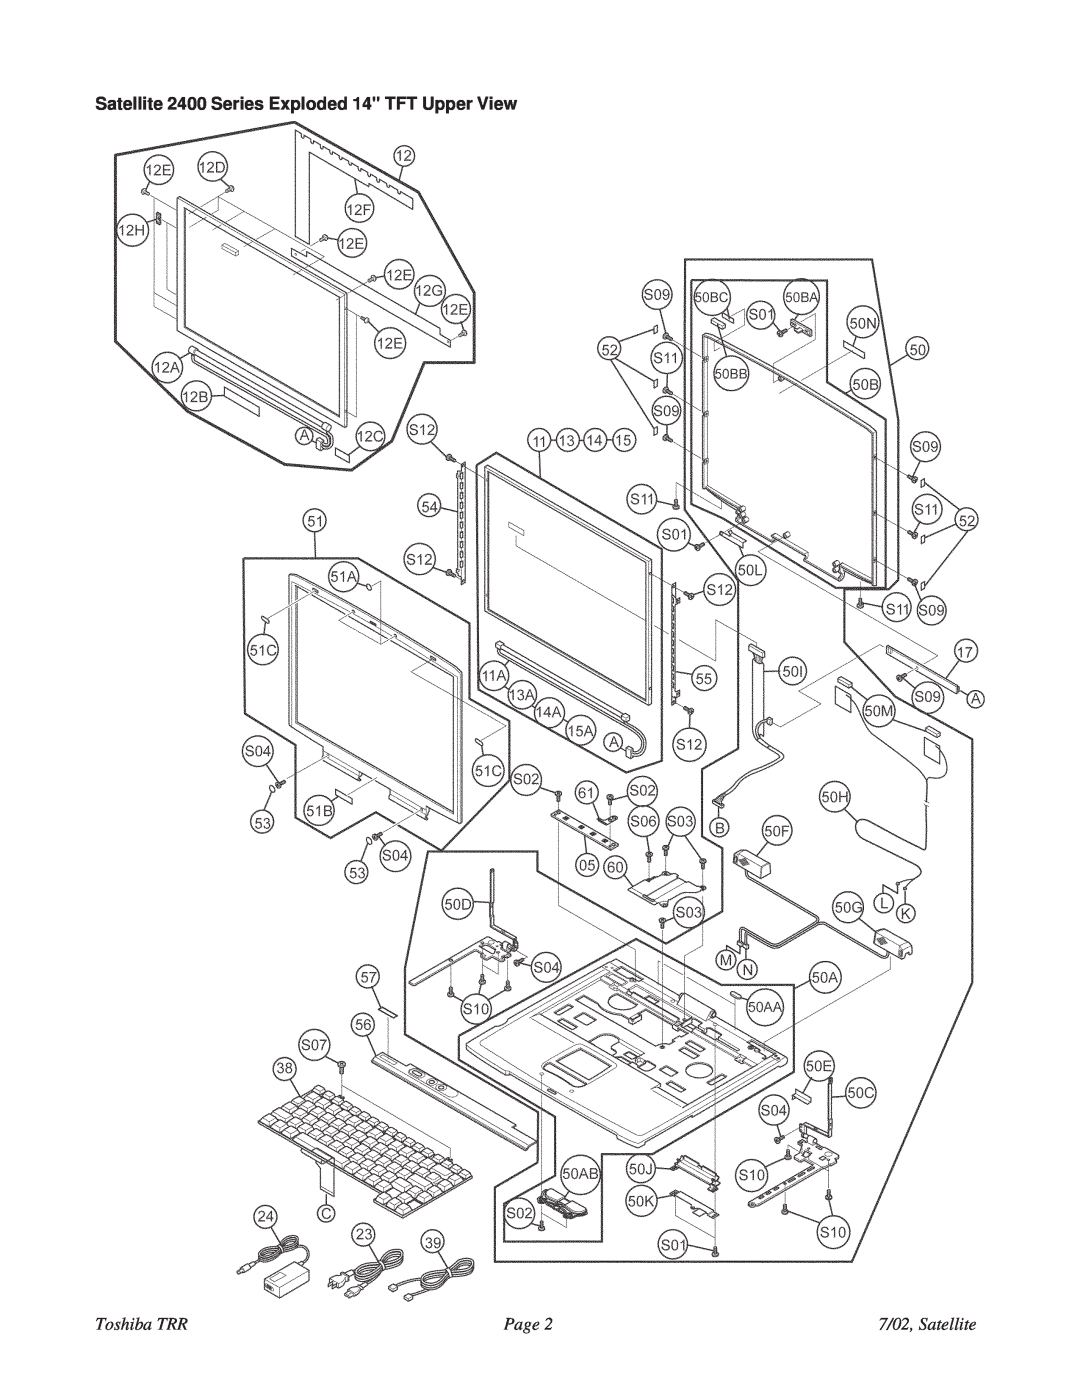 Toshiba 2405-S201 specifications Satellite 2400 Series Exploded 14 TFT Upper View, Toshiba TRR, Page, 7/02, Satellite 